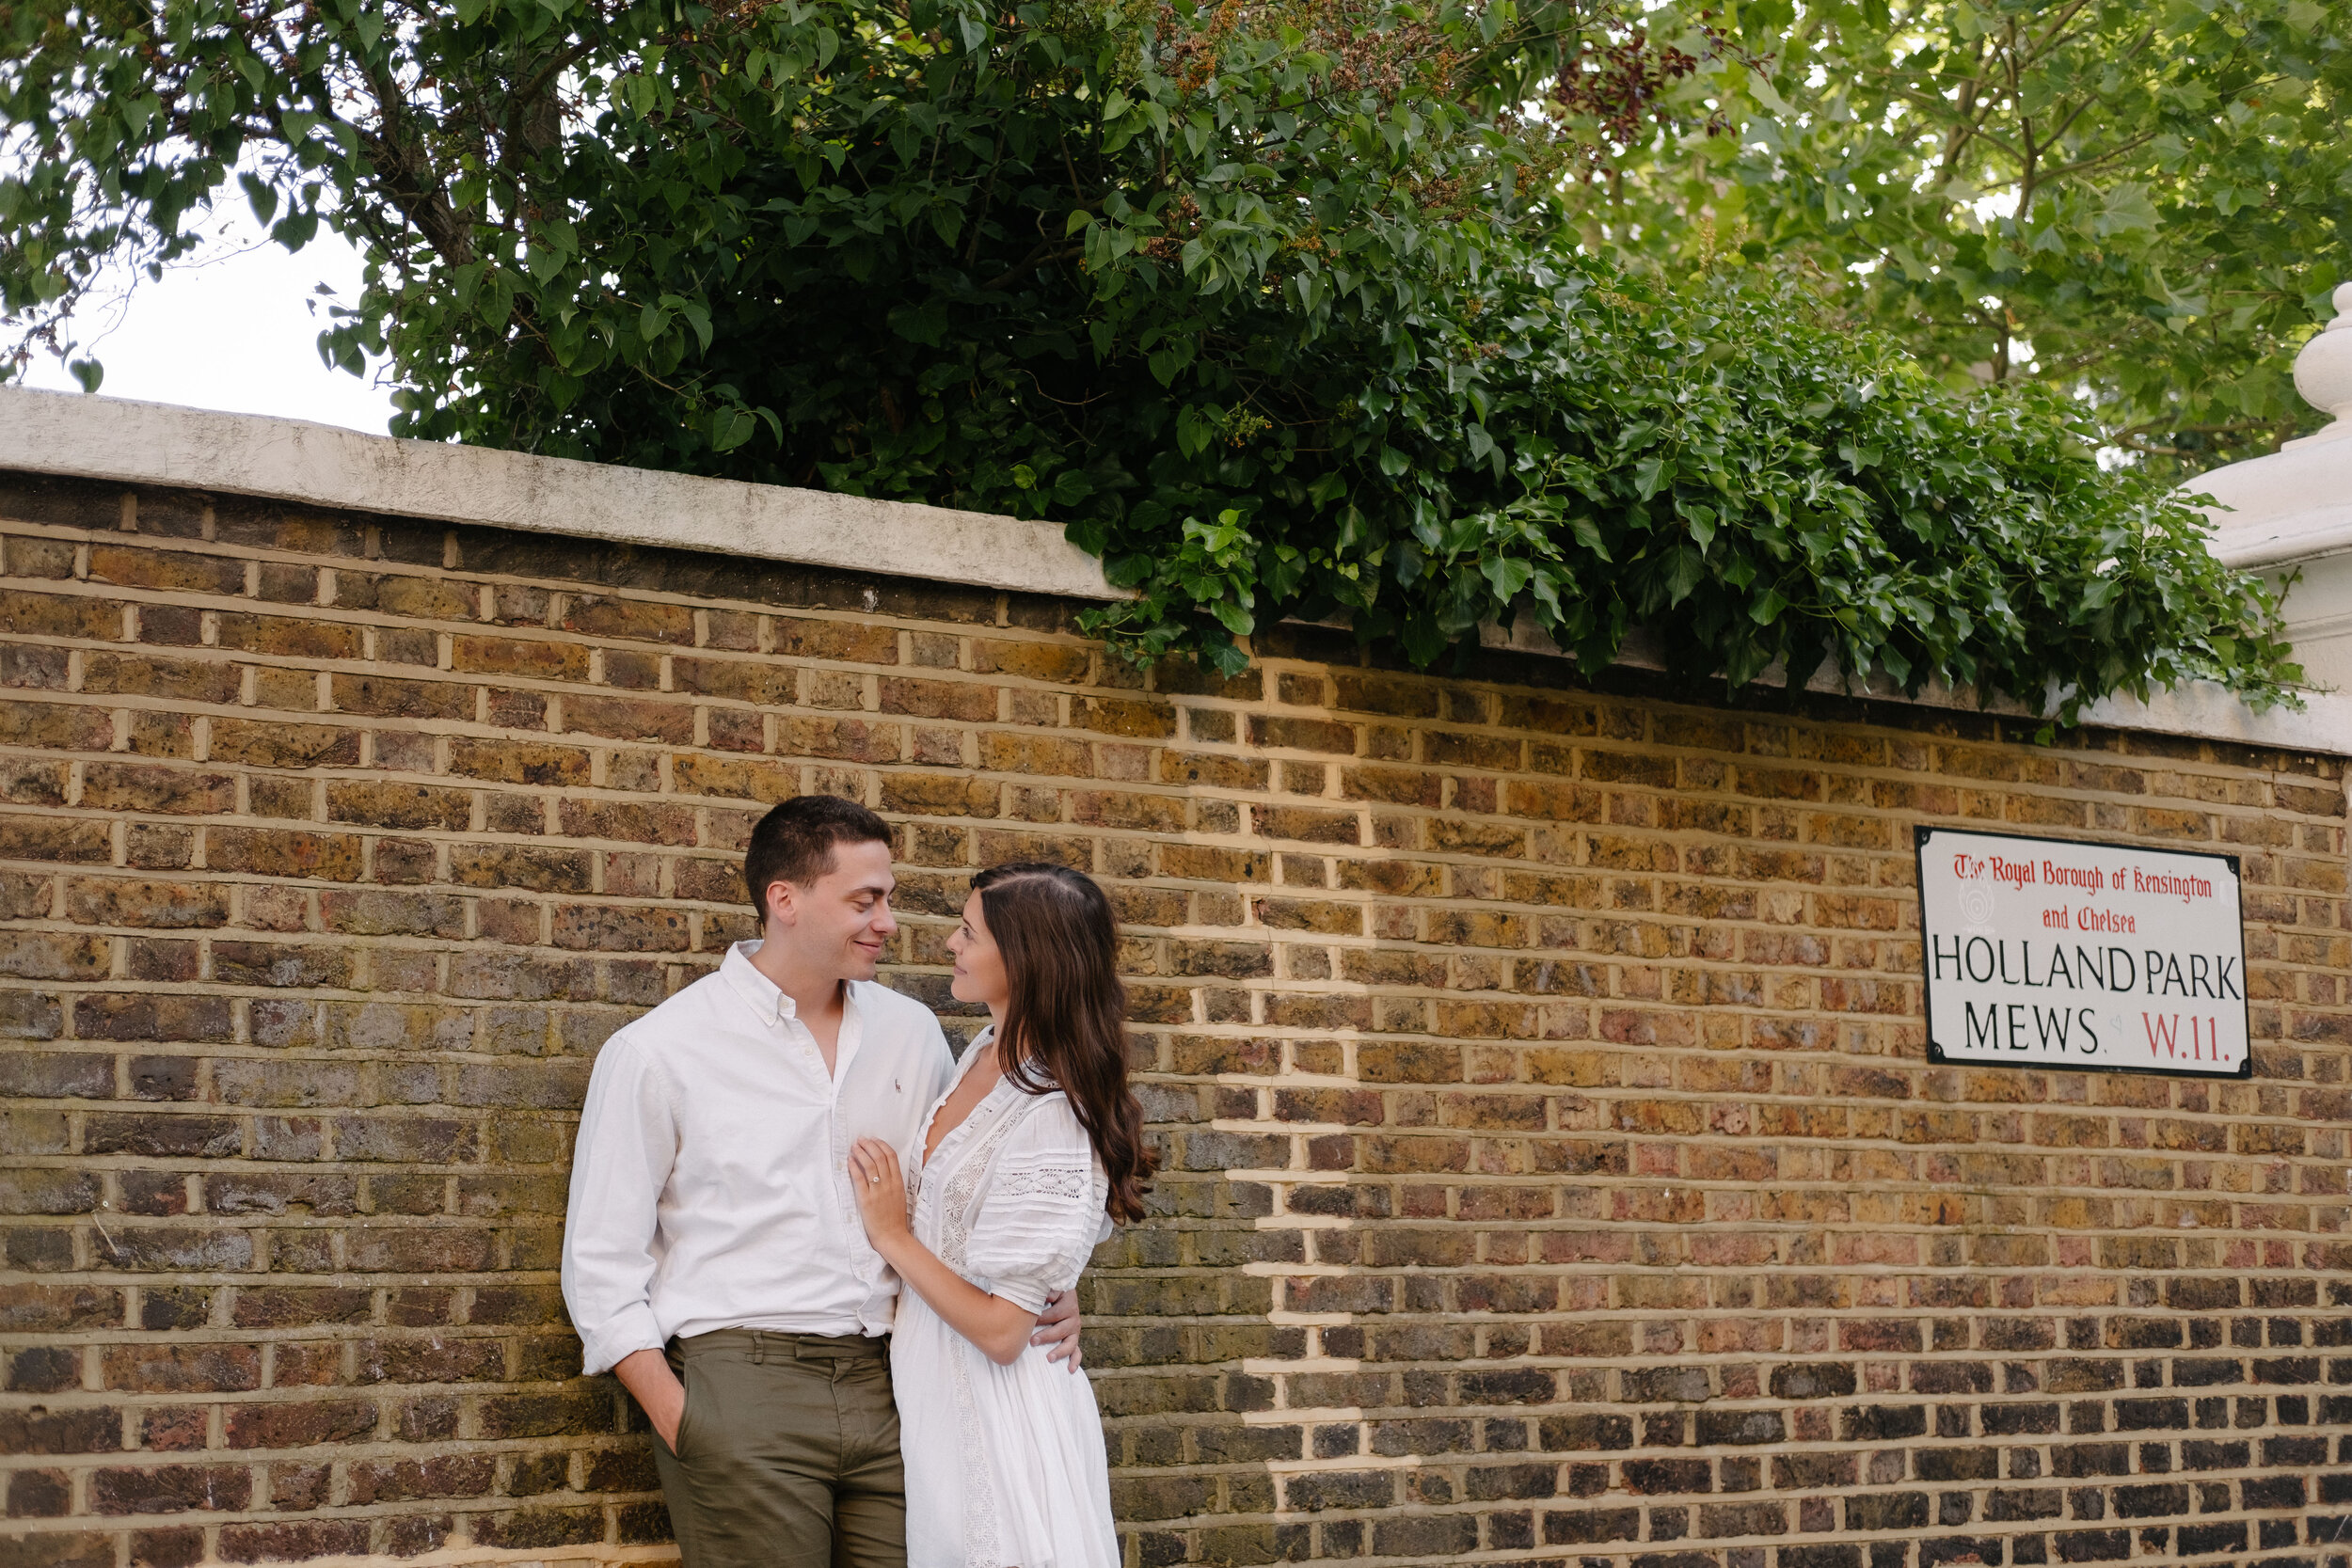 Holland Park mews couple leaning against the wall